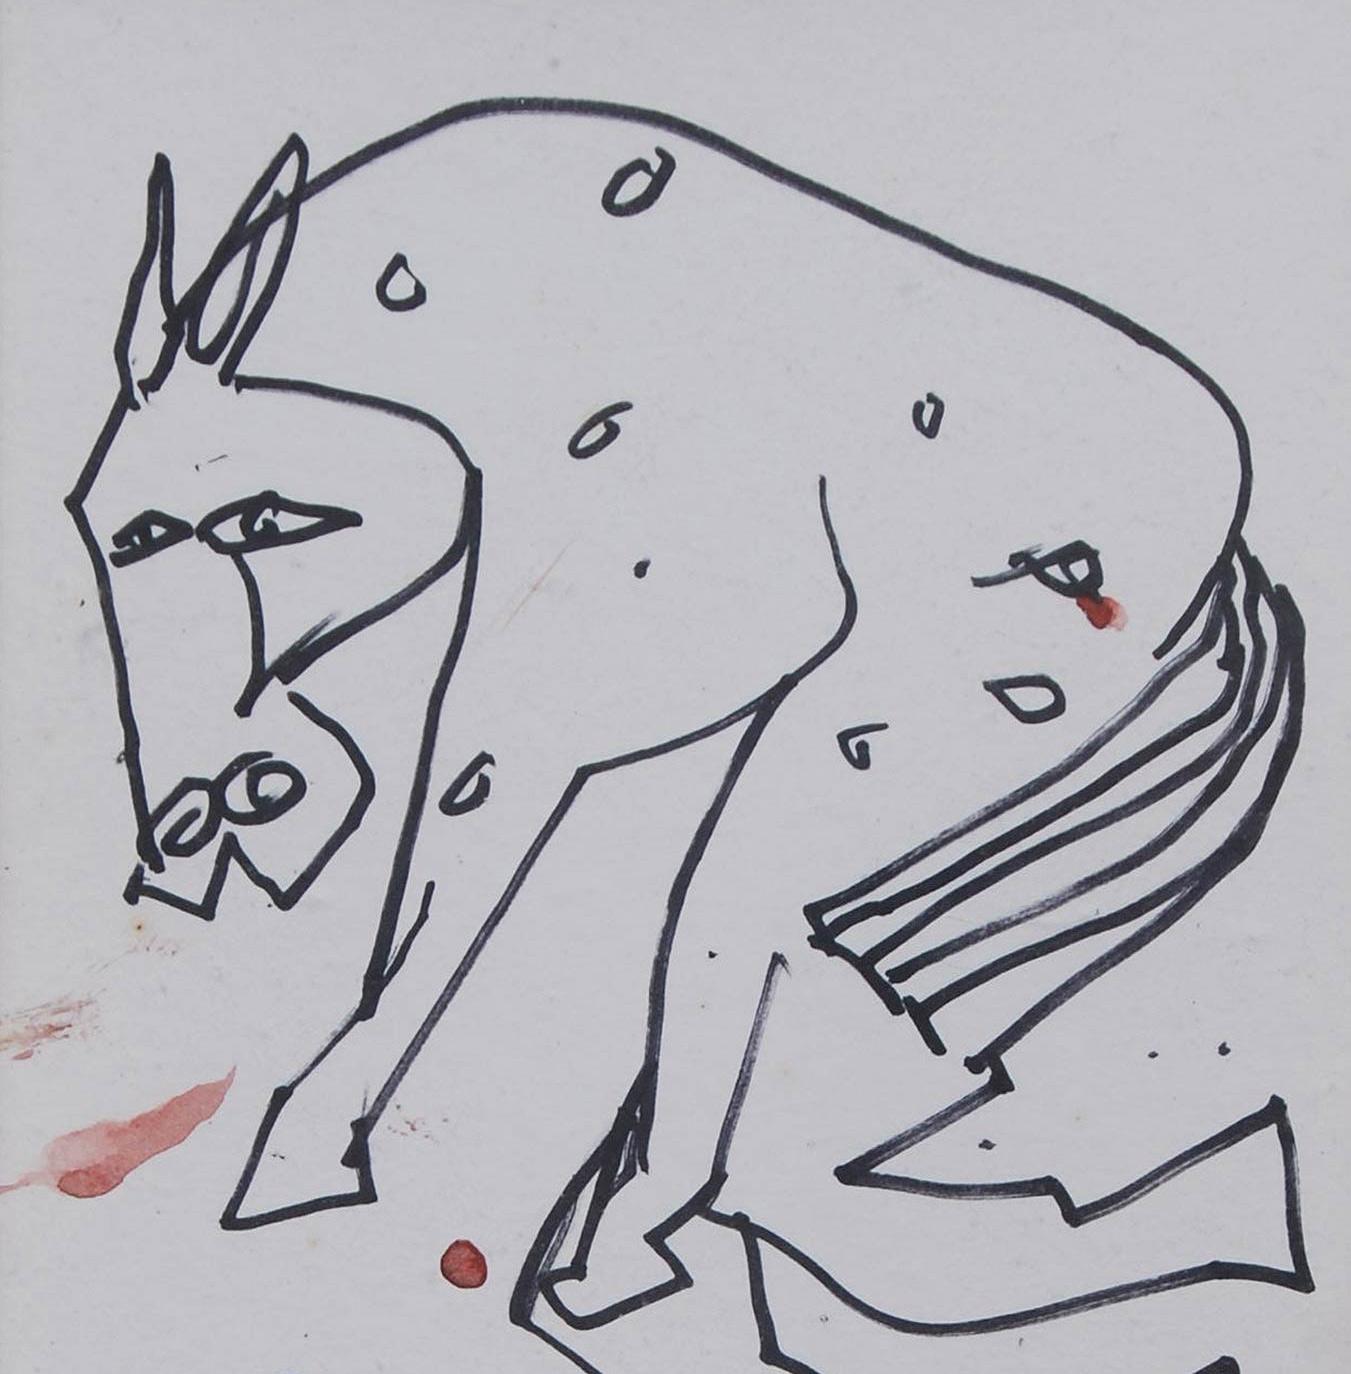 Sunil Das - Horse - 8.25 X 6.5 inches (unframed size)
Pen & Ink on Paper
Inclusive of shipment in ready to hang form.

Sunil Das was one of India's most important postmodernist painters and rose to prominence through his drawings of horses. He